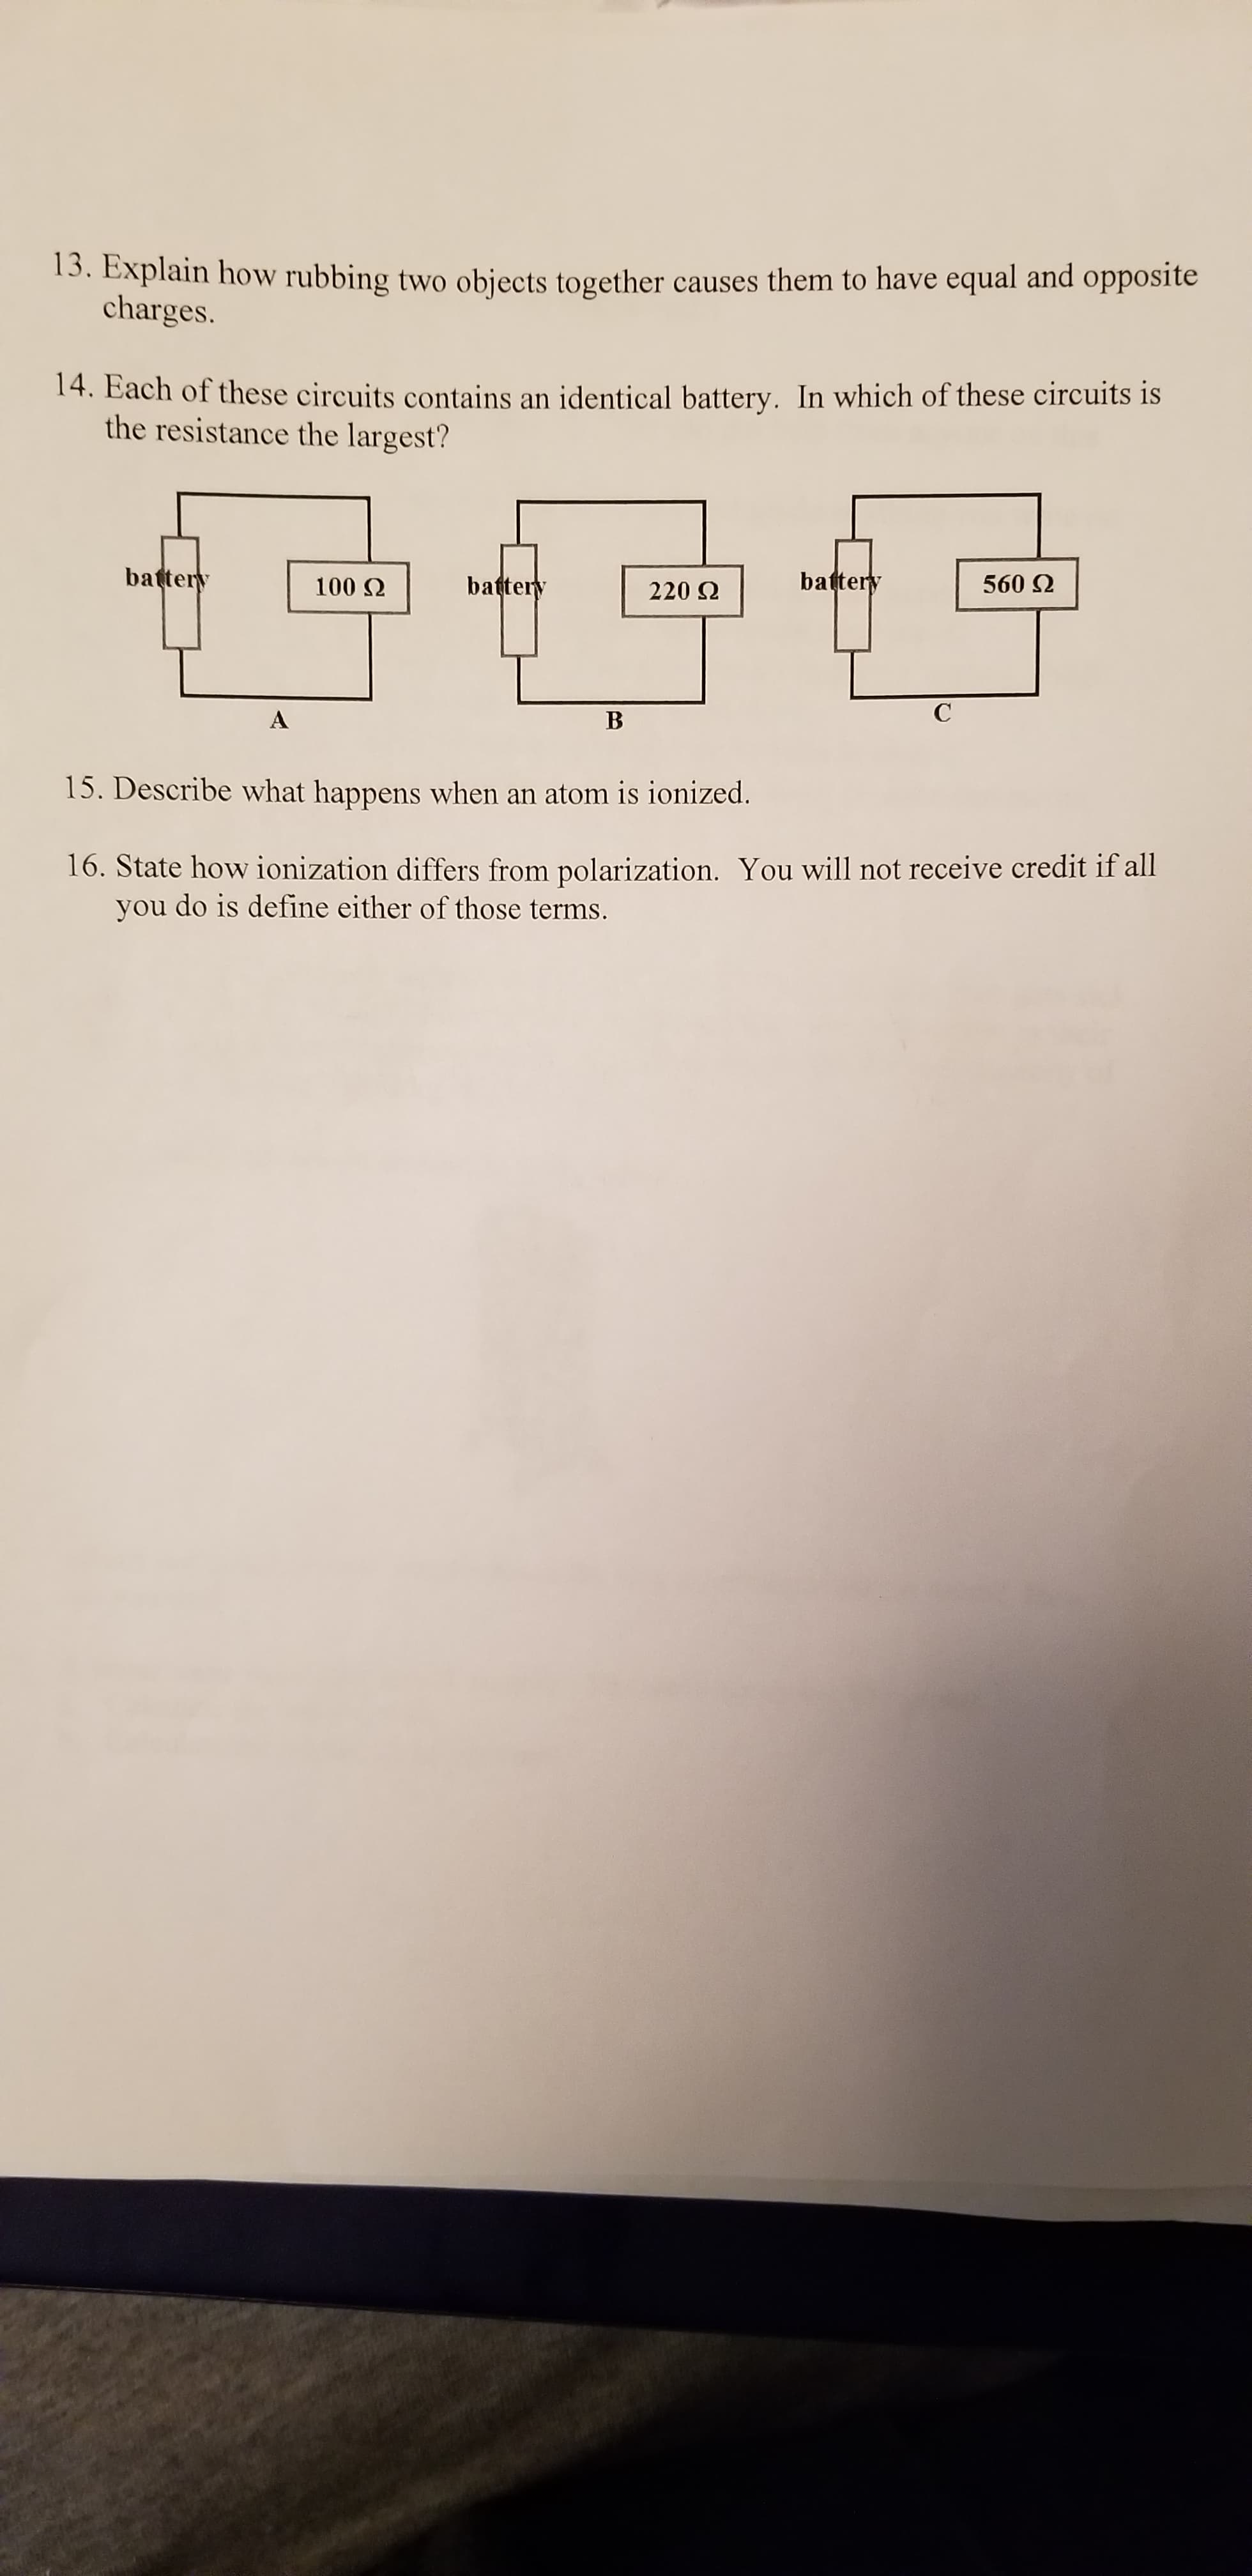 3. Explain how rubbing two objects together causes them to have equal and opposite
charges.
14. Each of these circuits contains an identical battery. In which of these circuits is
the resistance the largest?
battery
battery
battery
560 Q
100 Q
220 Q
C
B
15. Describe what happens when an atom is ionized.
16. State how ionization differs from polarization. You will not receive credit if all
you do is define either of those terms.
